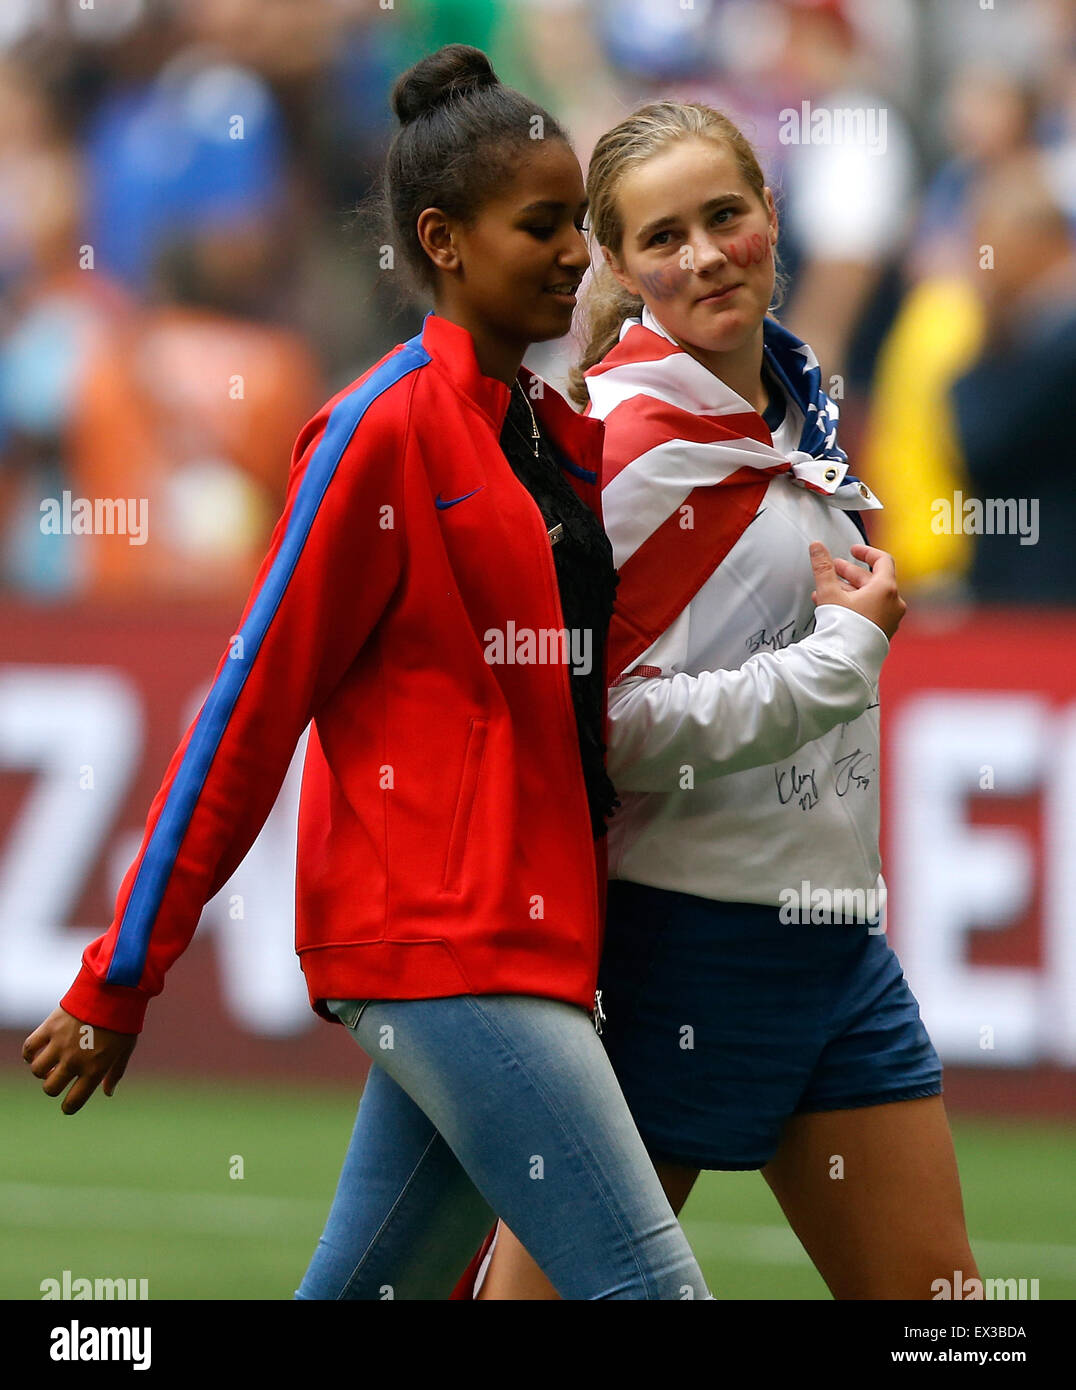 Vancouver, Canada. 05th July, 2015. Sasha Obama (L), daughter of U.S. President Barack Obama, and Maisy Biden, granddaughter of U.S. Vice President Joe Biden, walk off the pitch after talking with the U.S. team after the final of FIFA Women's World Cup 2015 between the United States and Japan at BC Place Stadium in Vancouver, Canada on July 5, 2015. The United States claimed the title after defeating Japan with 5-2. Credit:  Xinhua/Alamy Live News Stock Photo